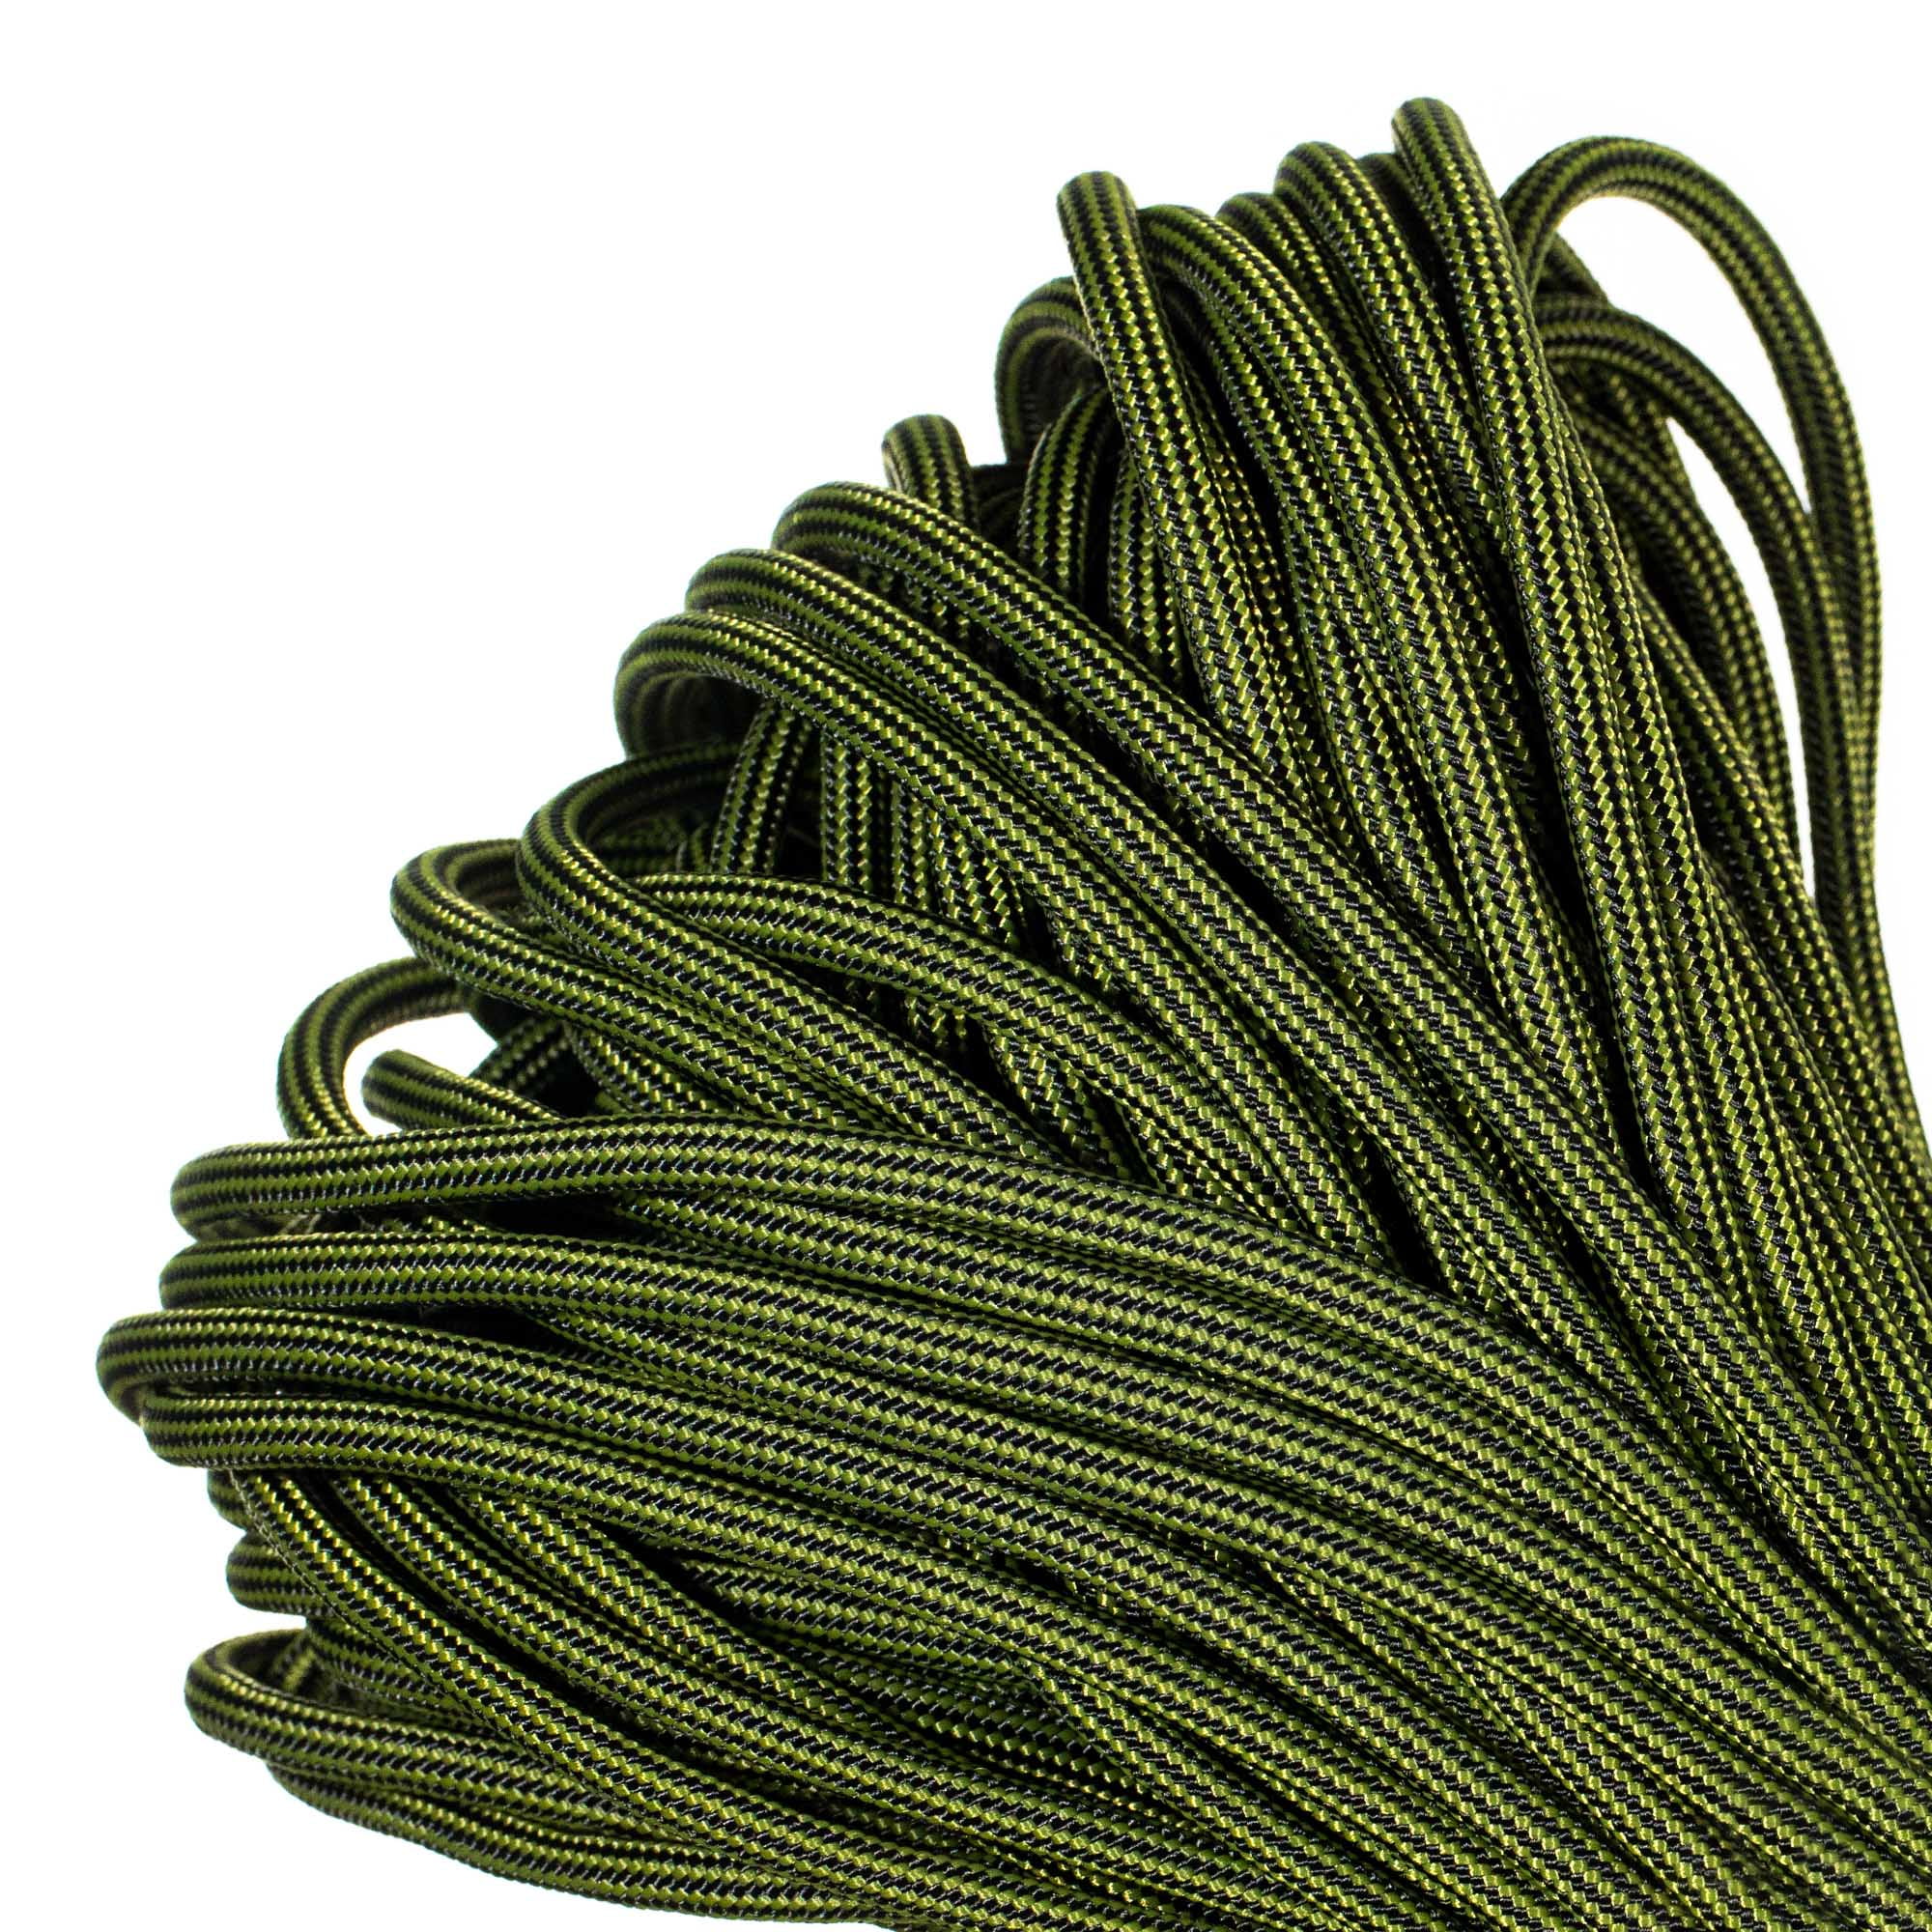 550 Paracord Olive Drab (OD) and Moss Camo Made in the USA Nylon